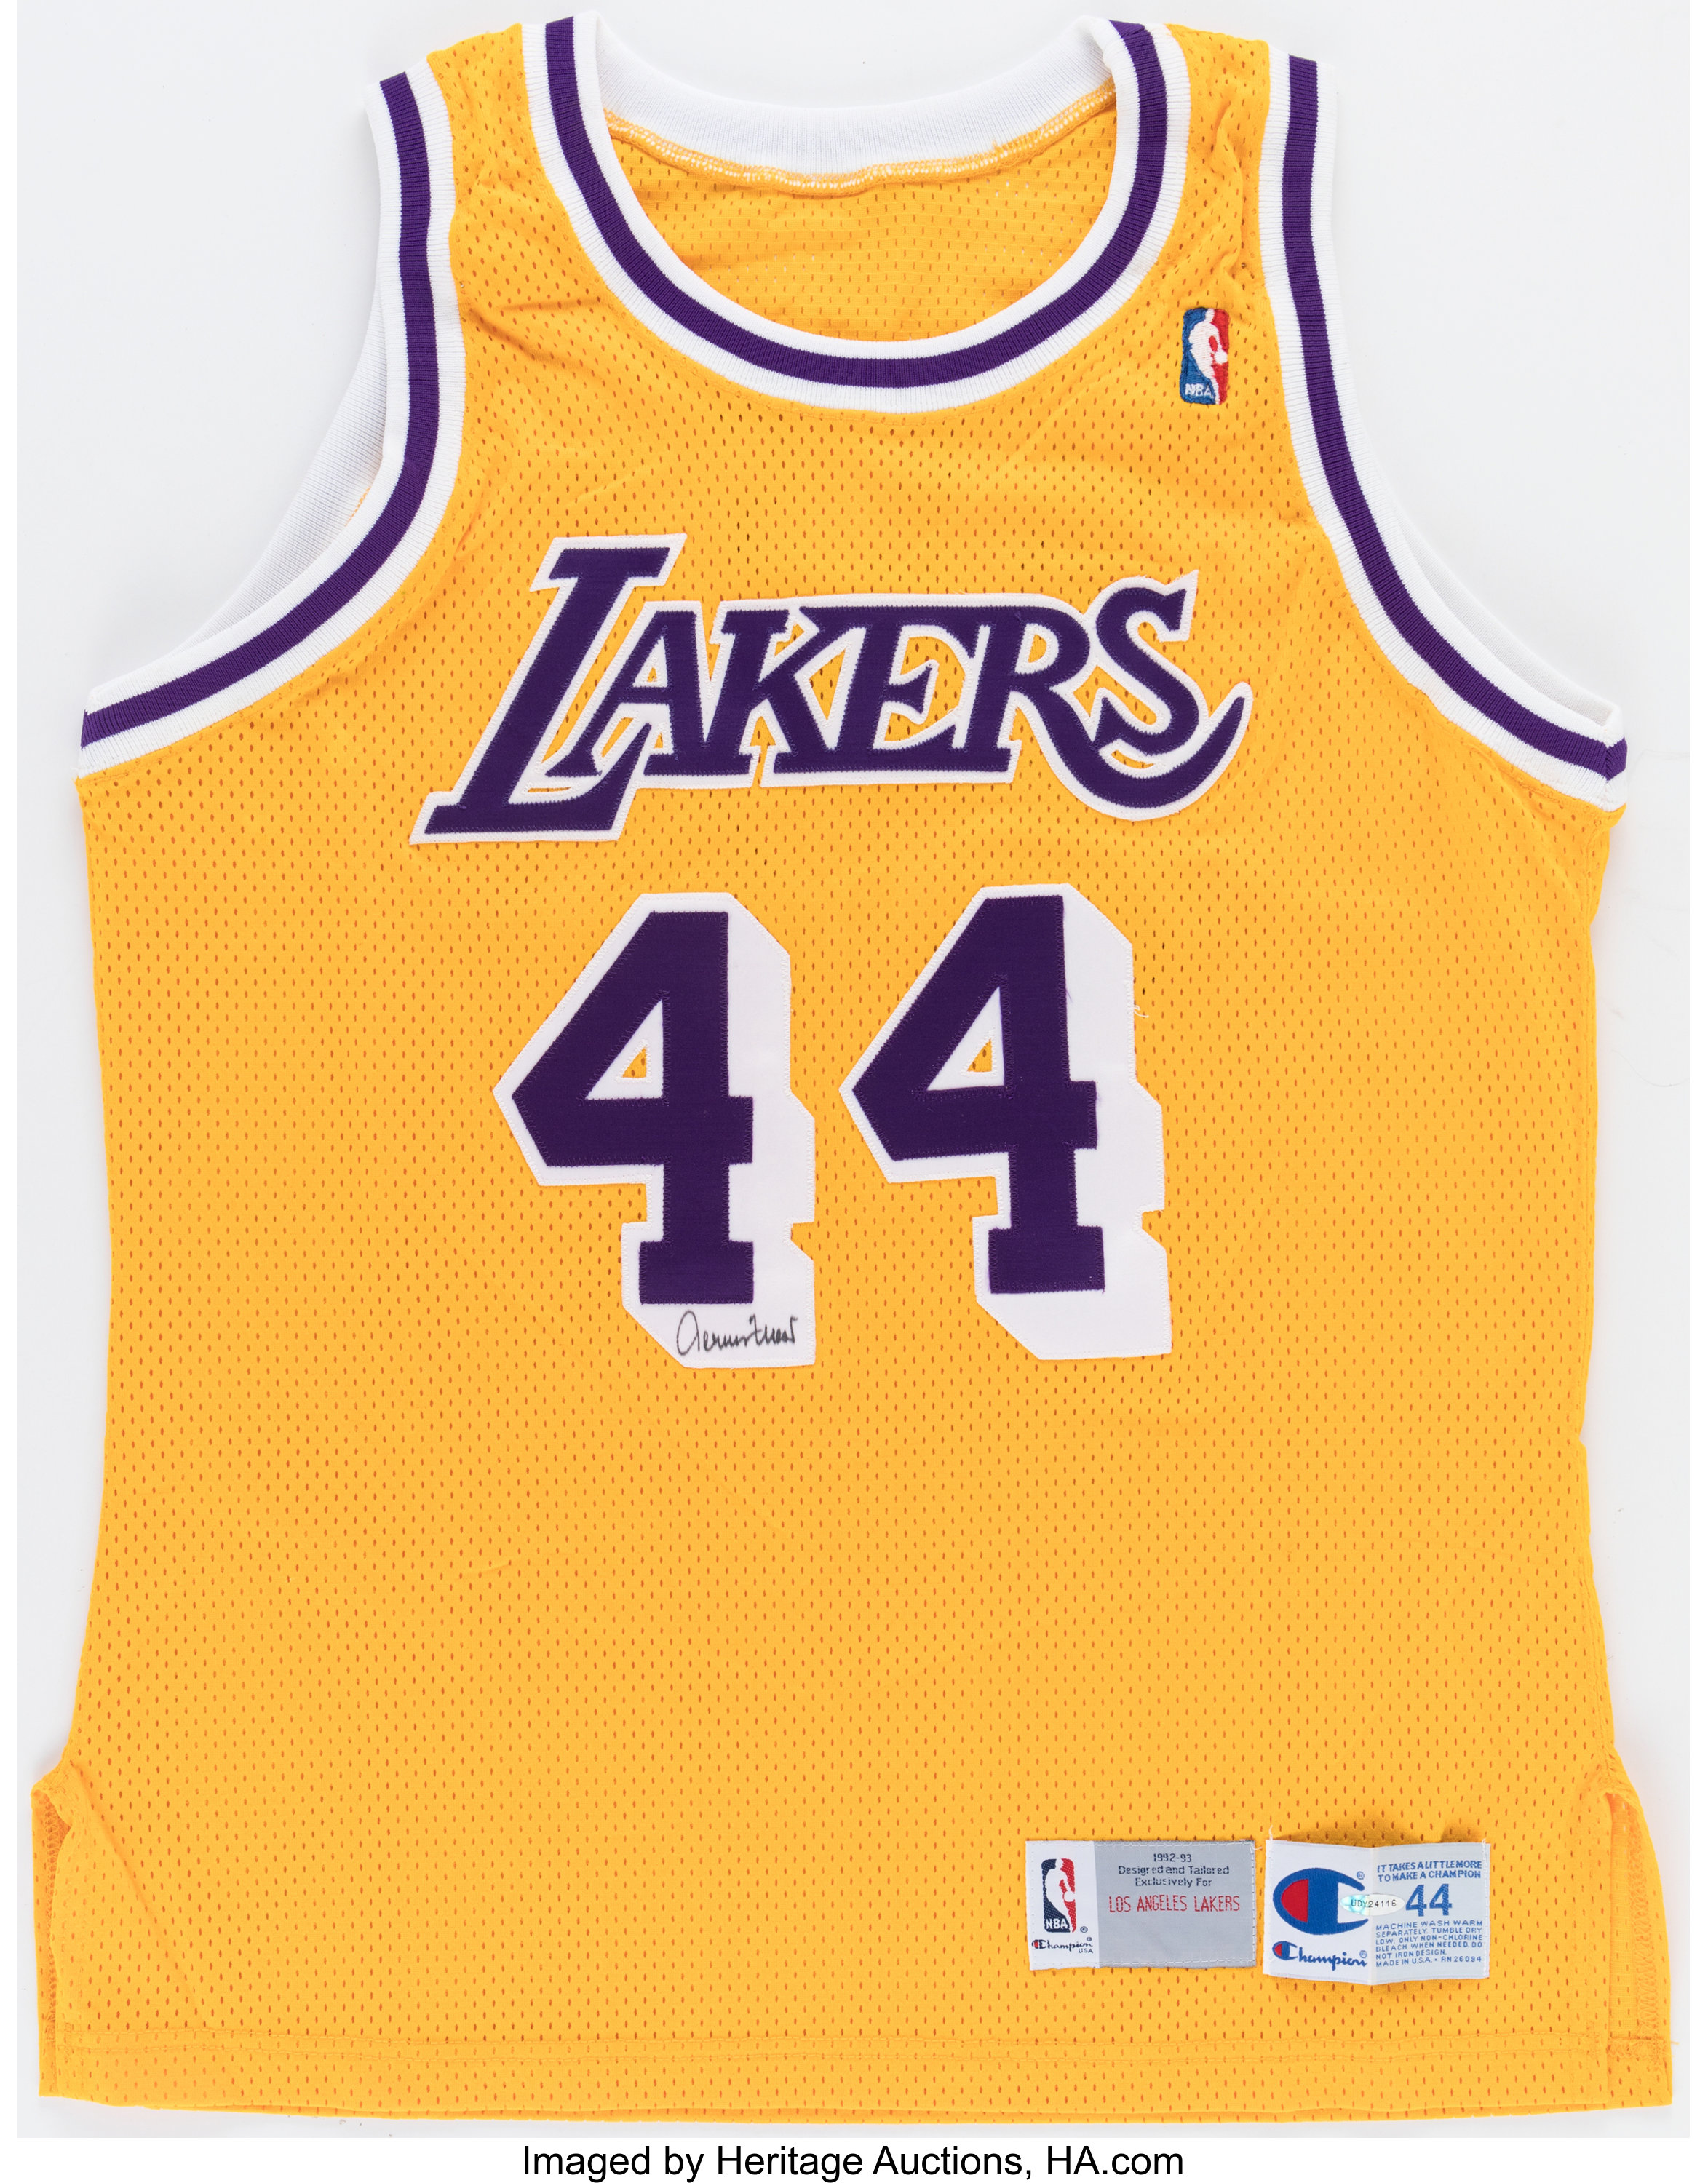 Jerry West Autographed Los Angeles Lakers M&N Swingman Jersey Inscribed The  Logo